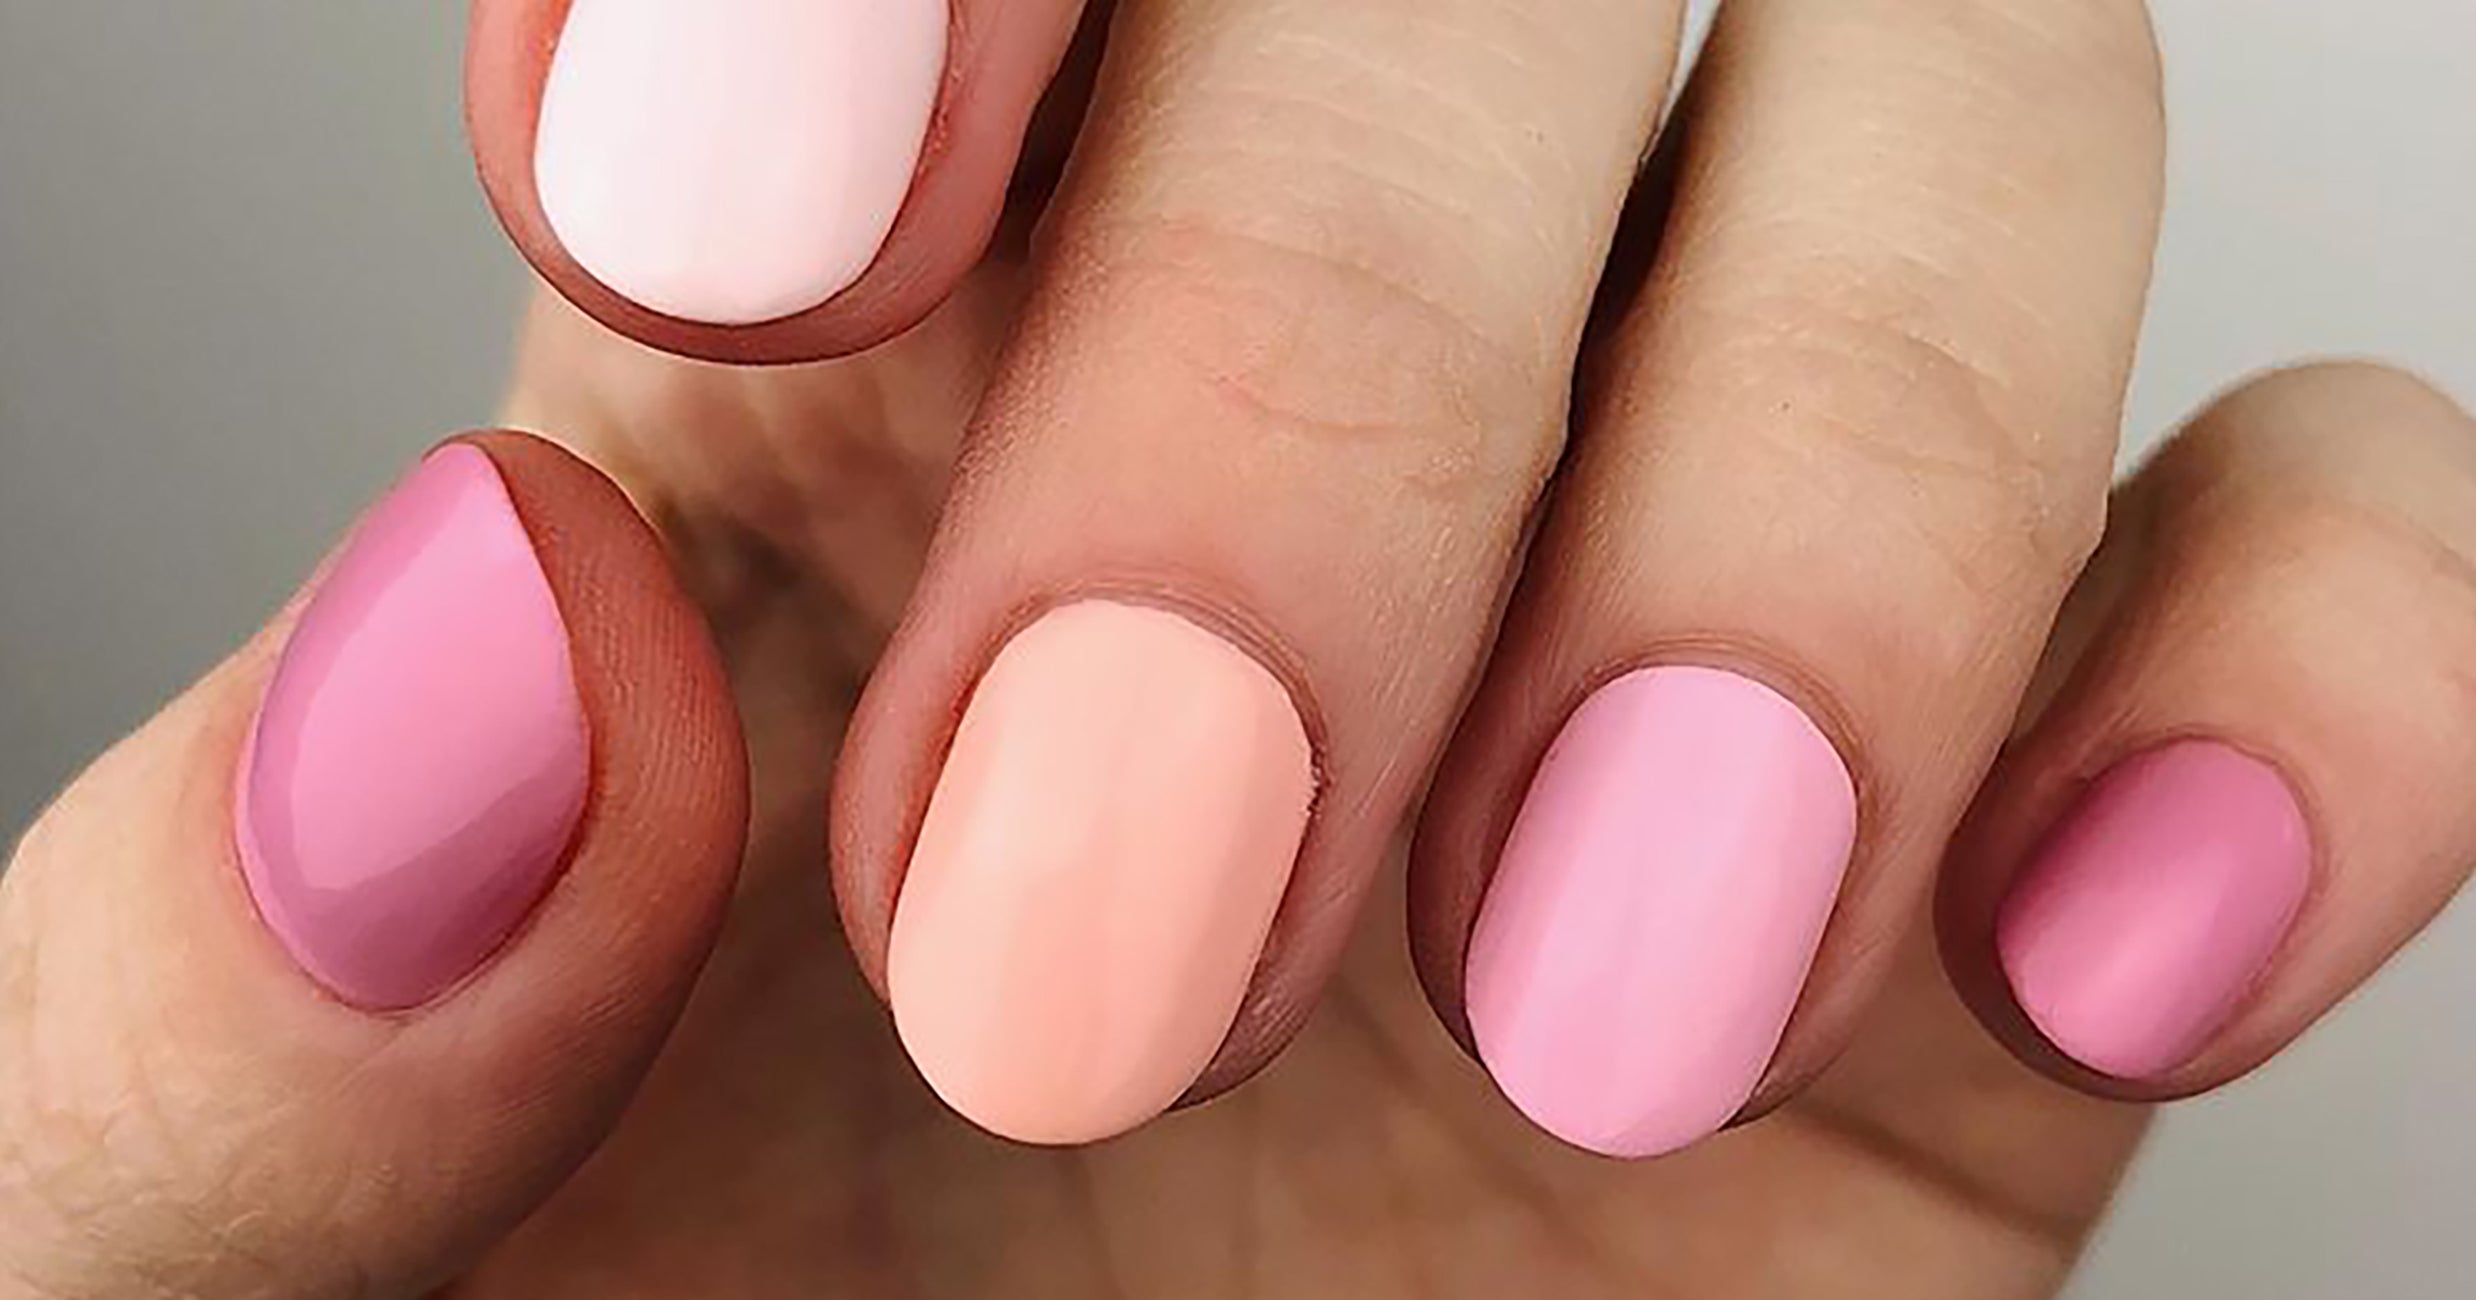 2. The Top 10 Pink Nail Designs for a Perfect Manicure - wide 2